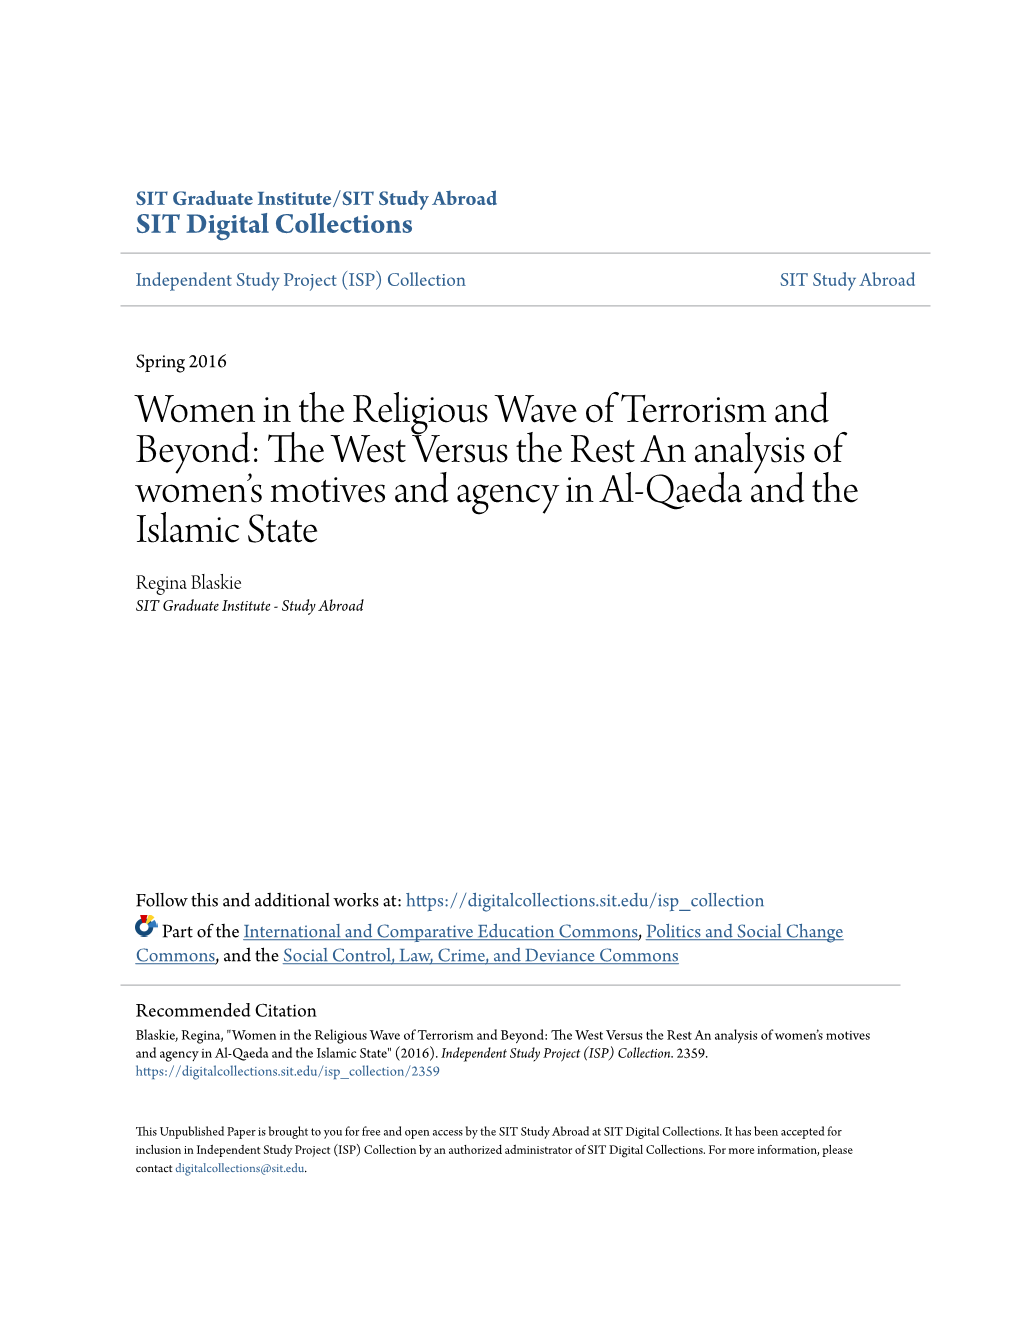 Women in the Religious Wave of Terrorism and Beyond: the West Versus the Rest an Analysis of Womenâ•Žs Motives and Agency In